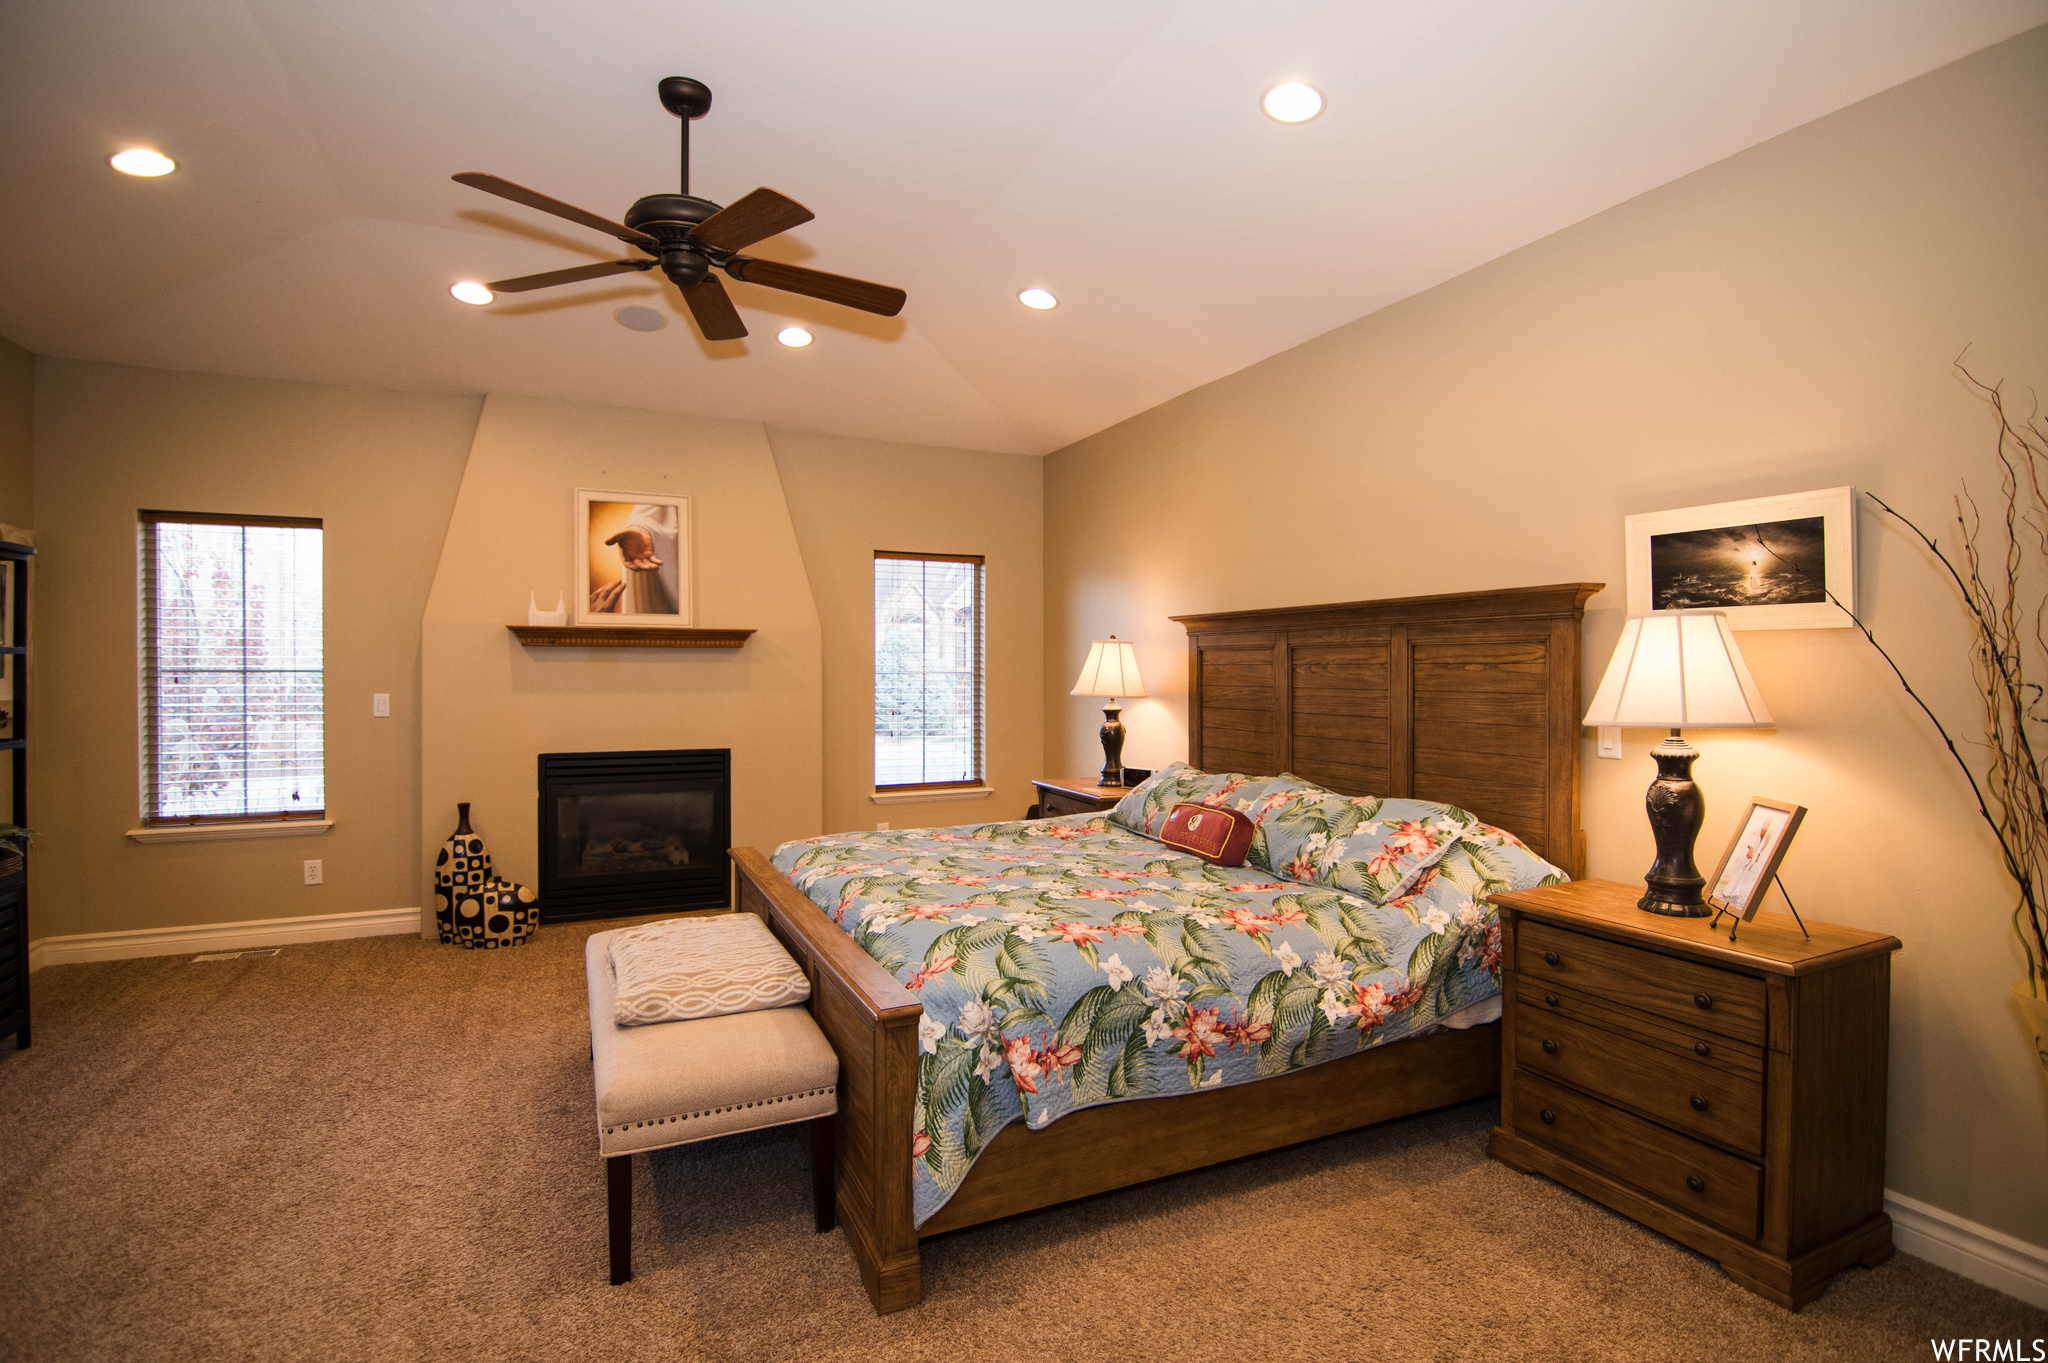 Carpeted bedroom with multiple windows, ceiling fan, and vaulted ceiling